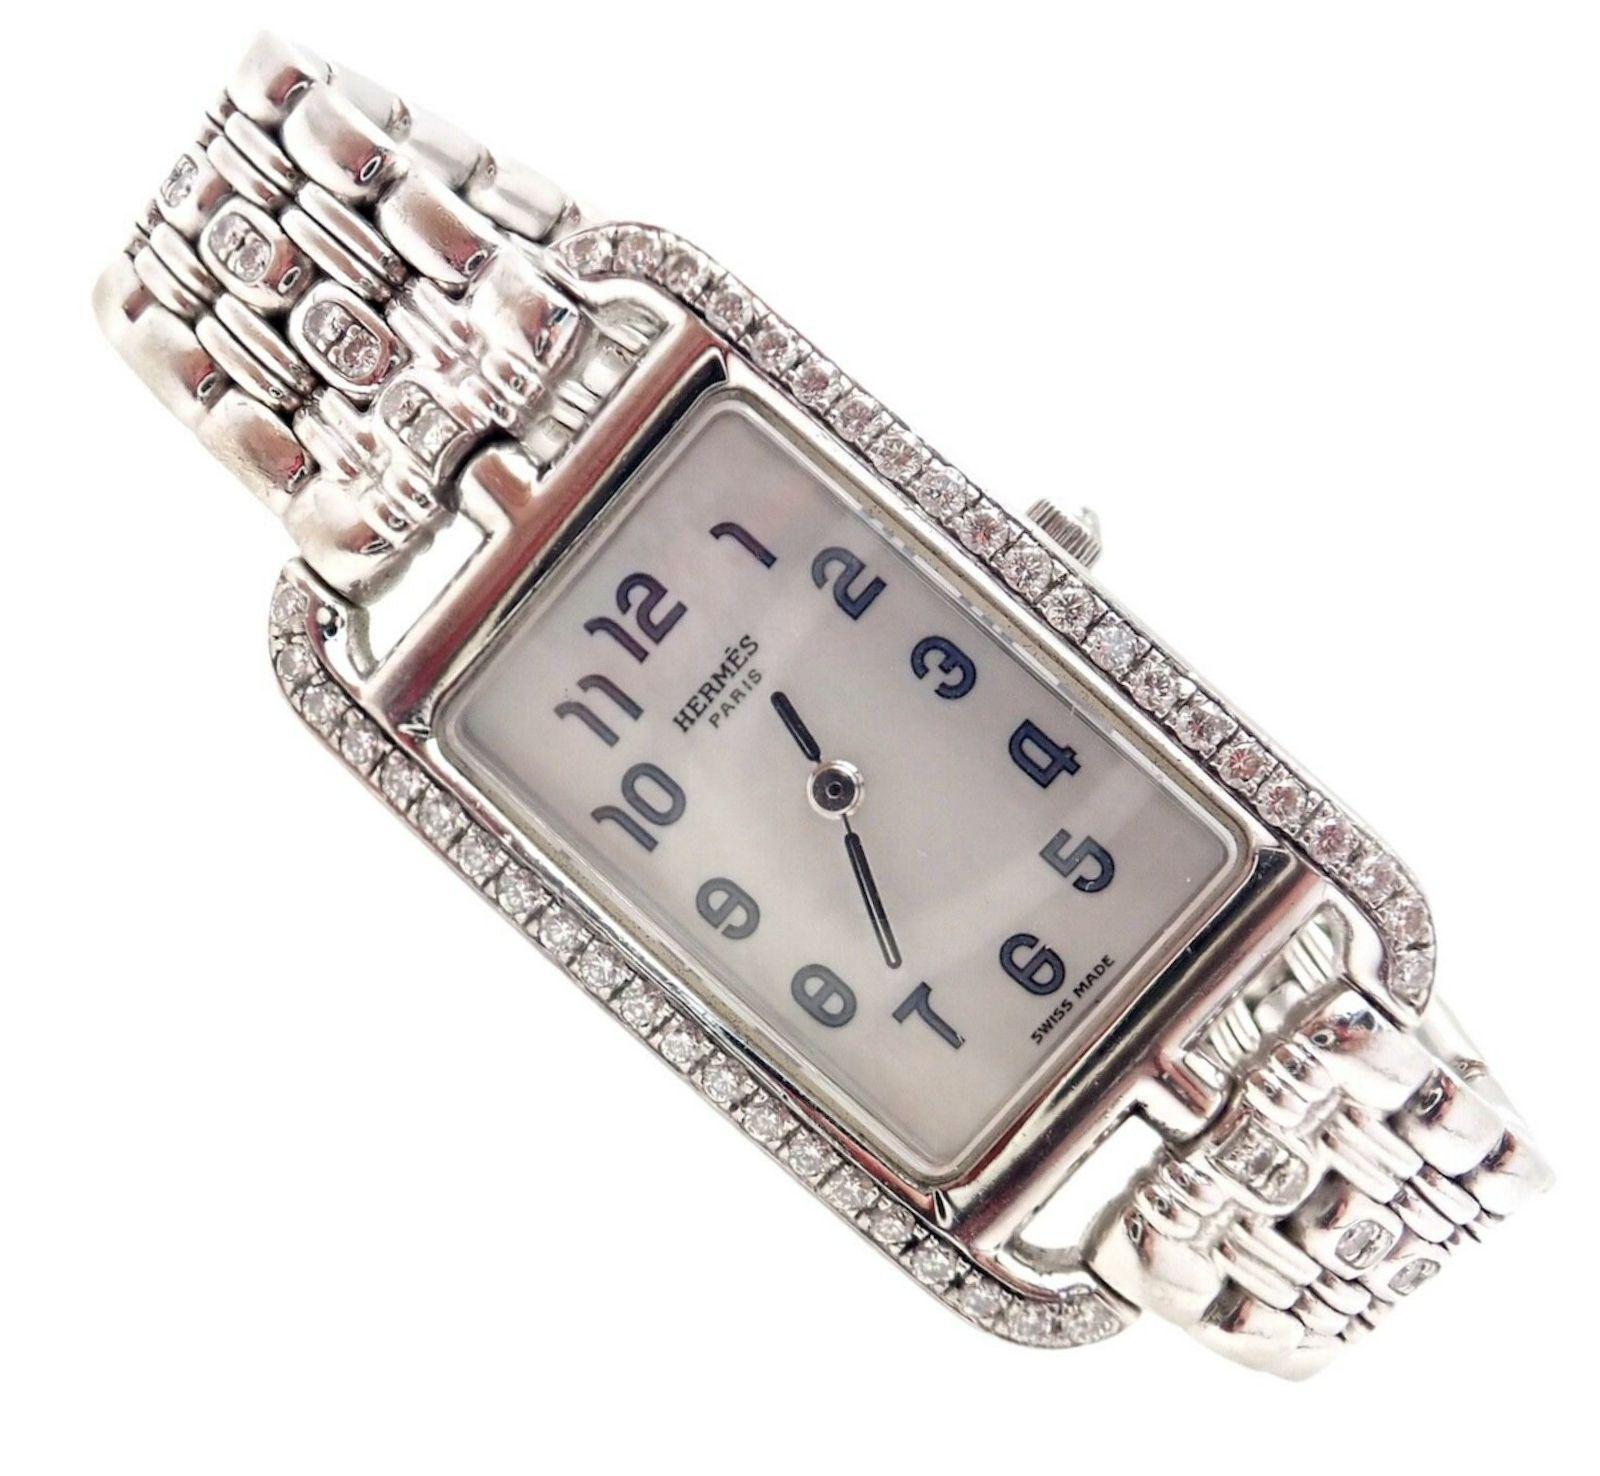 18k white gold diamond Cape Cod Nantucket watch by Hermes. 
With 58 round brilliant cut diamonds VVS1 clarity, E color total weight approx. 1.16ct
Details: 
Style Number: Cape Cod Nantucket
Reference Number:  NA1.292
Case Dimensions:  20mm x